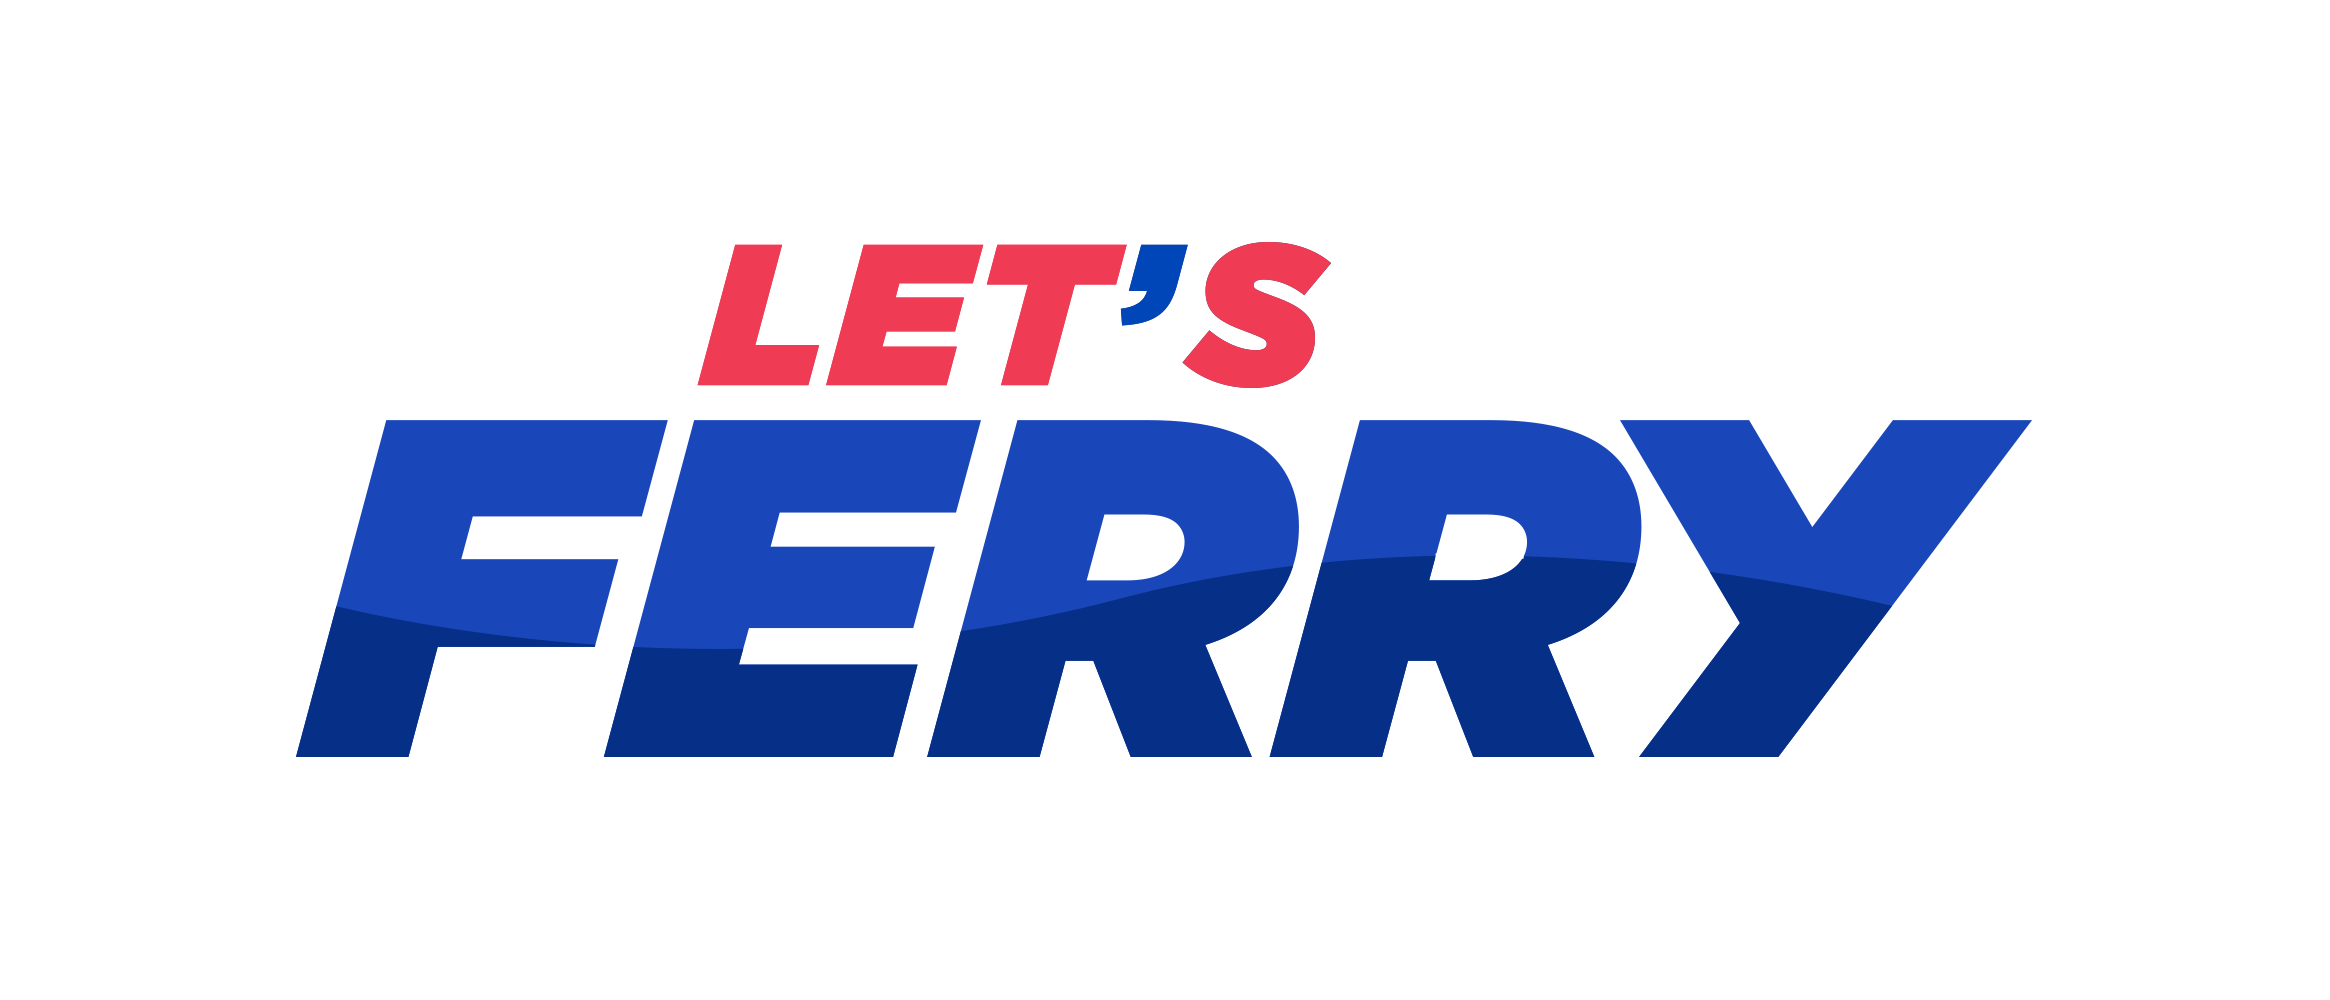 Lets Ferry